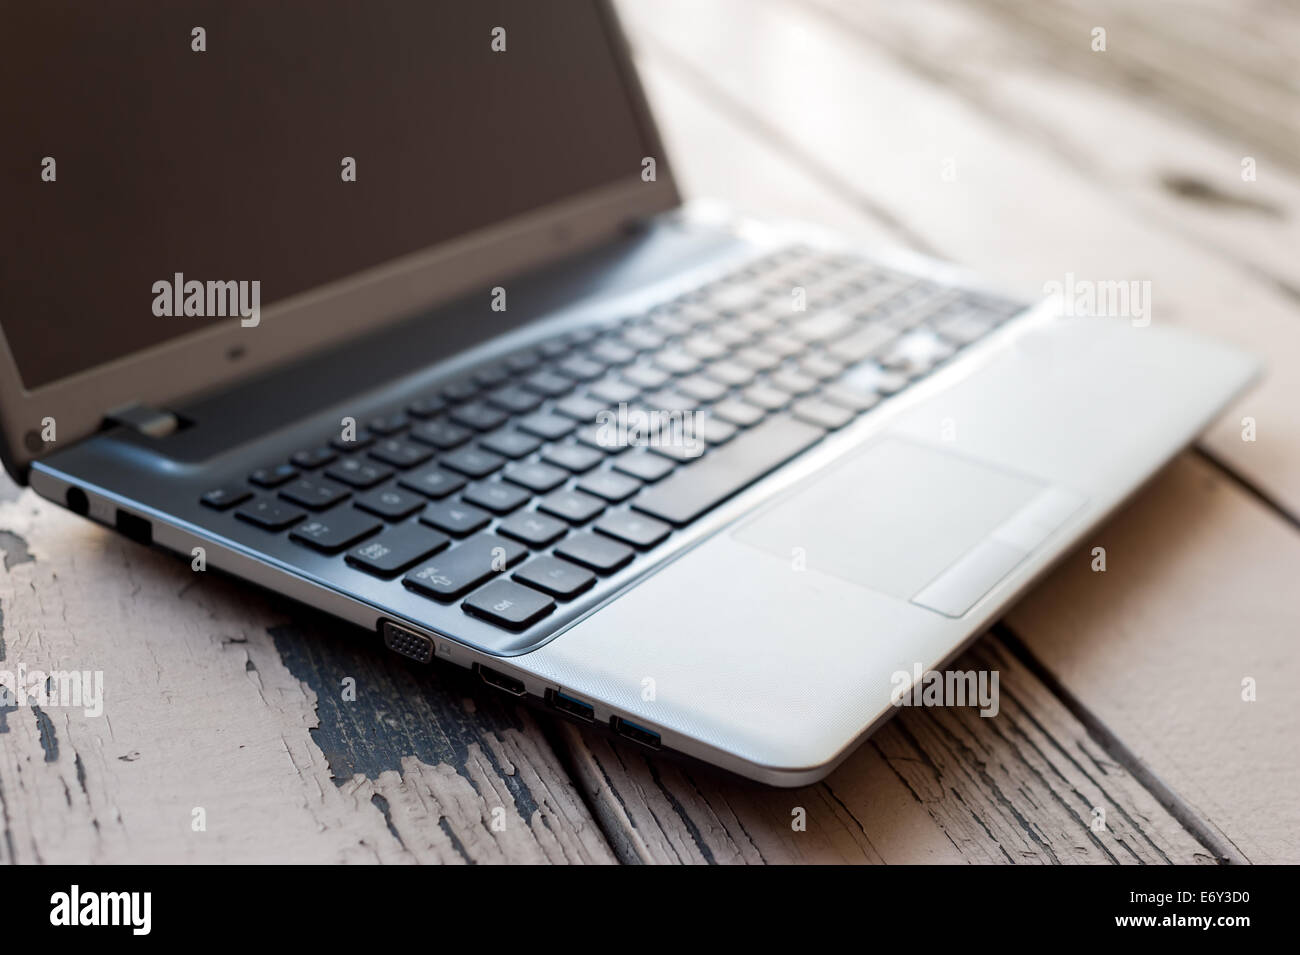 Laptop on the wooden table Stock Photo